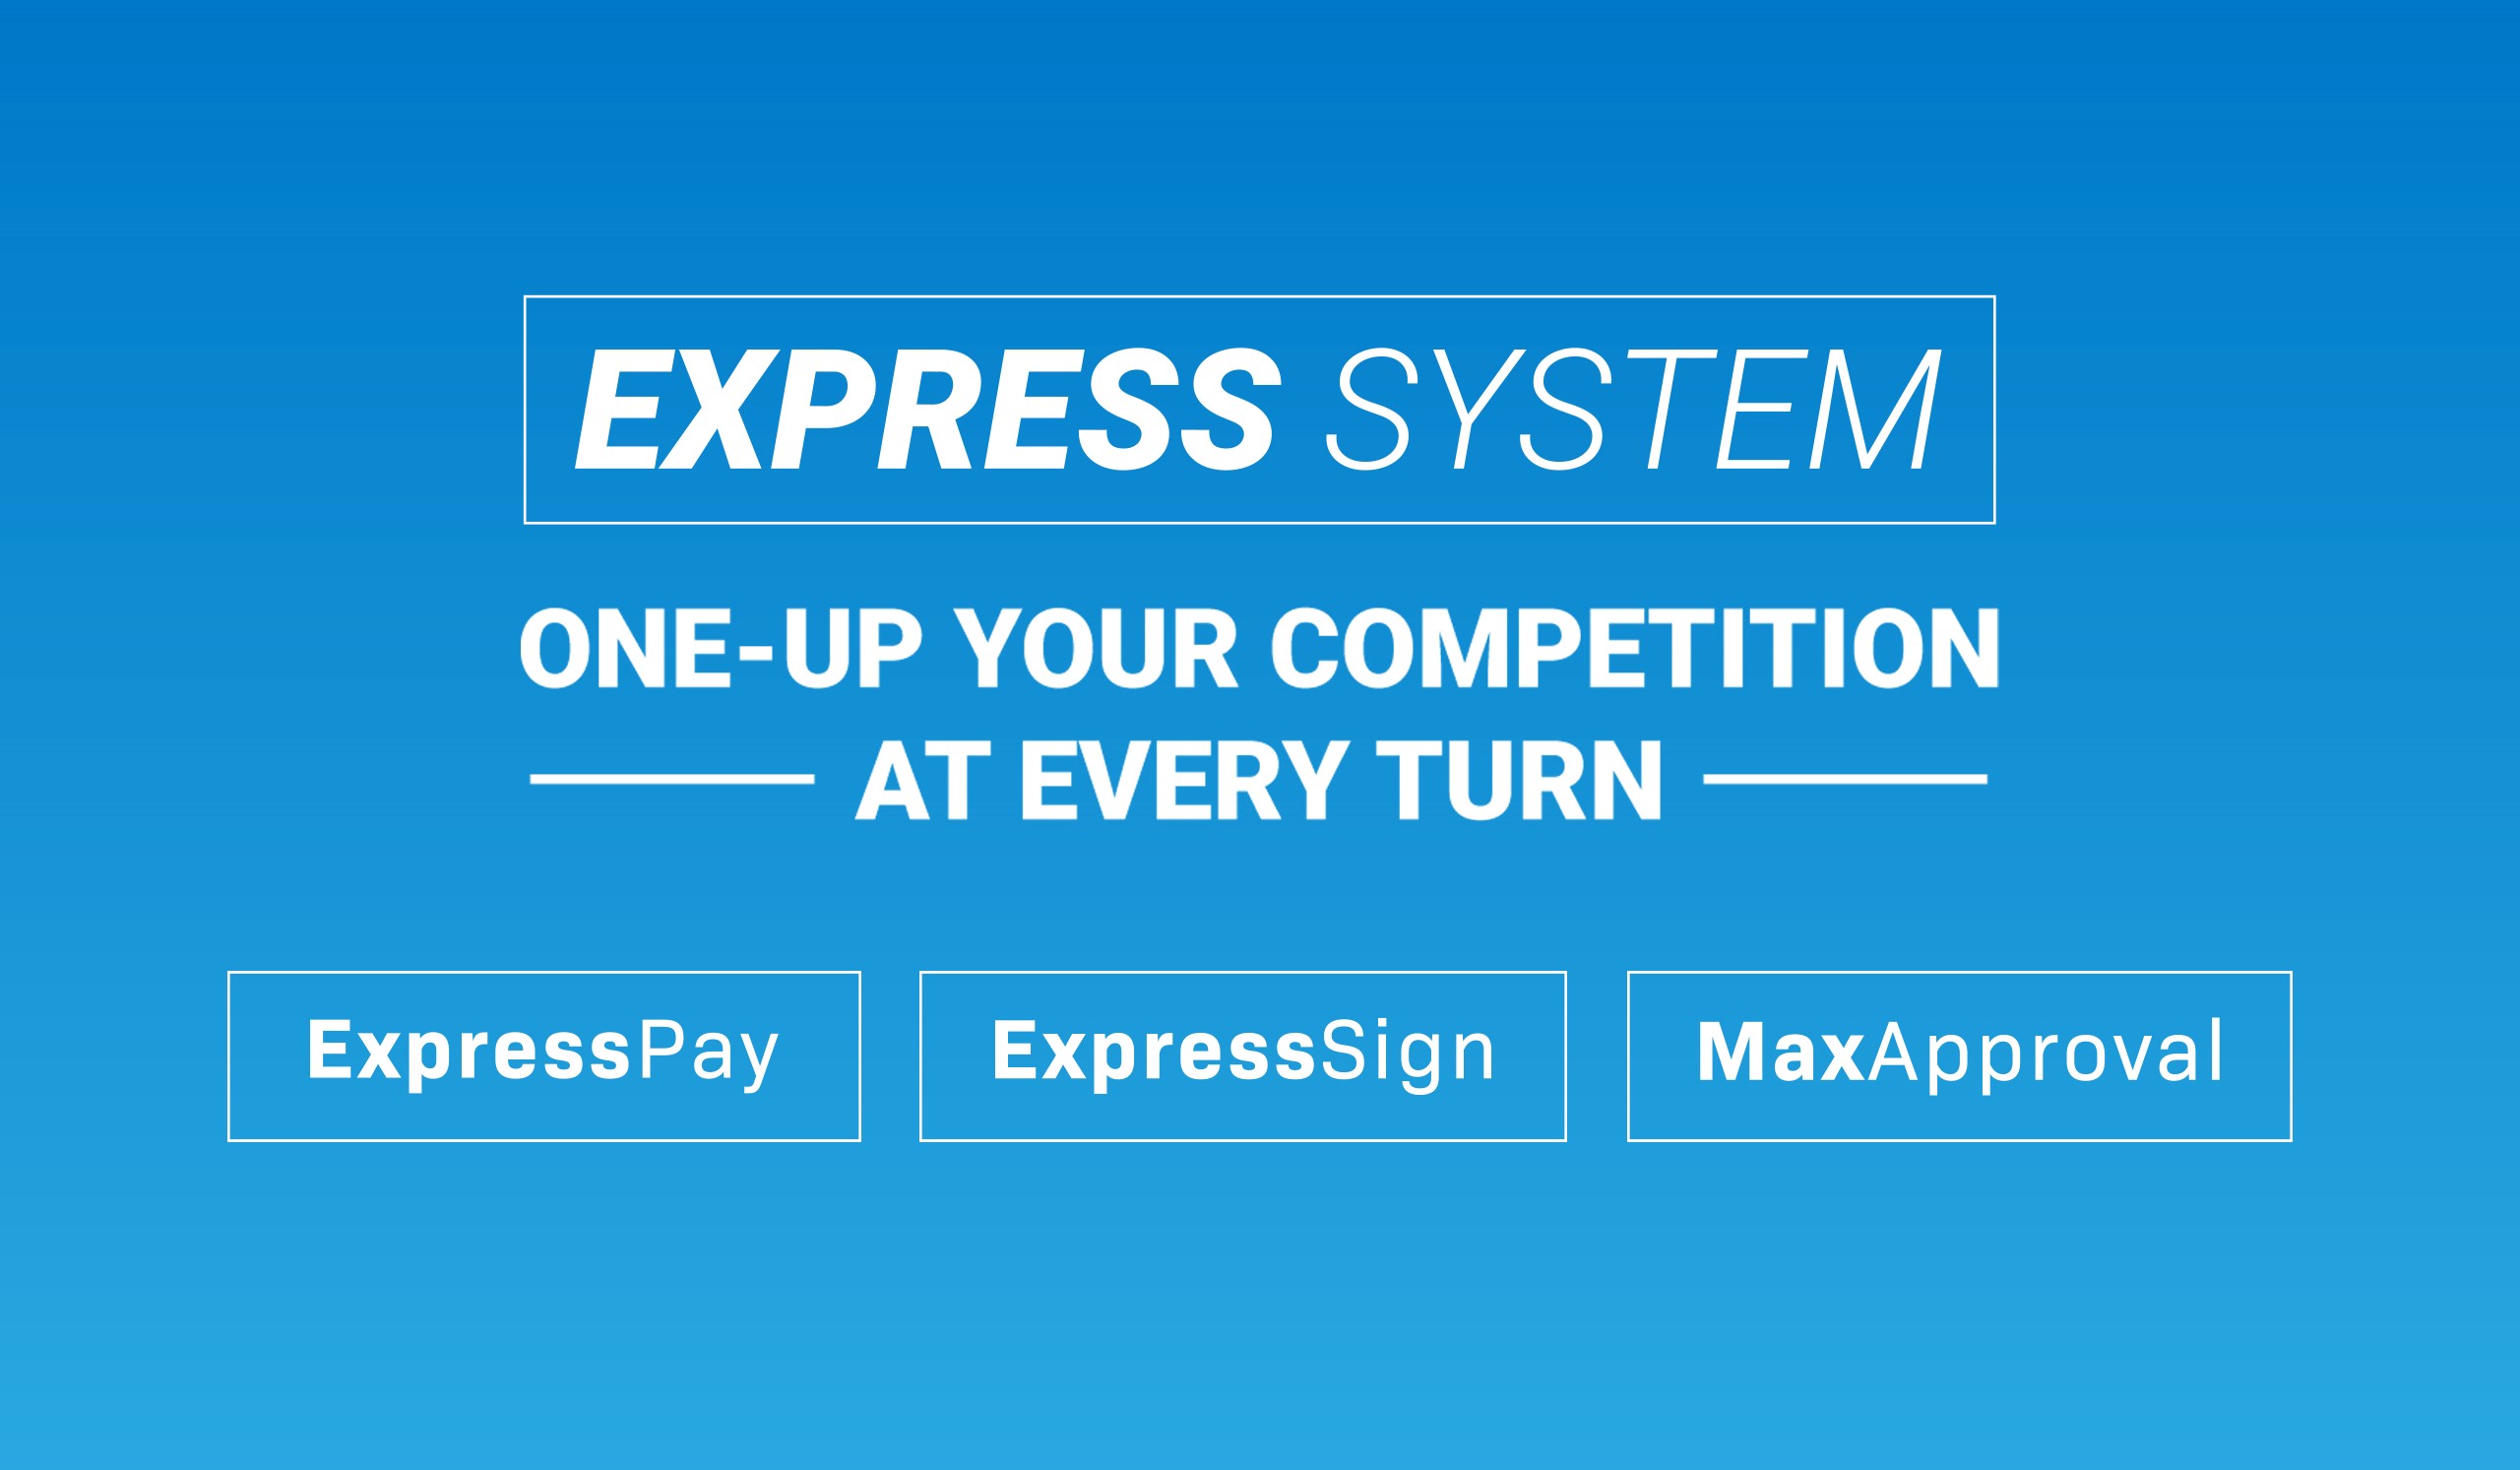 Introducing the New Express System